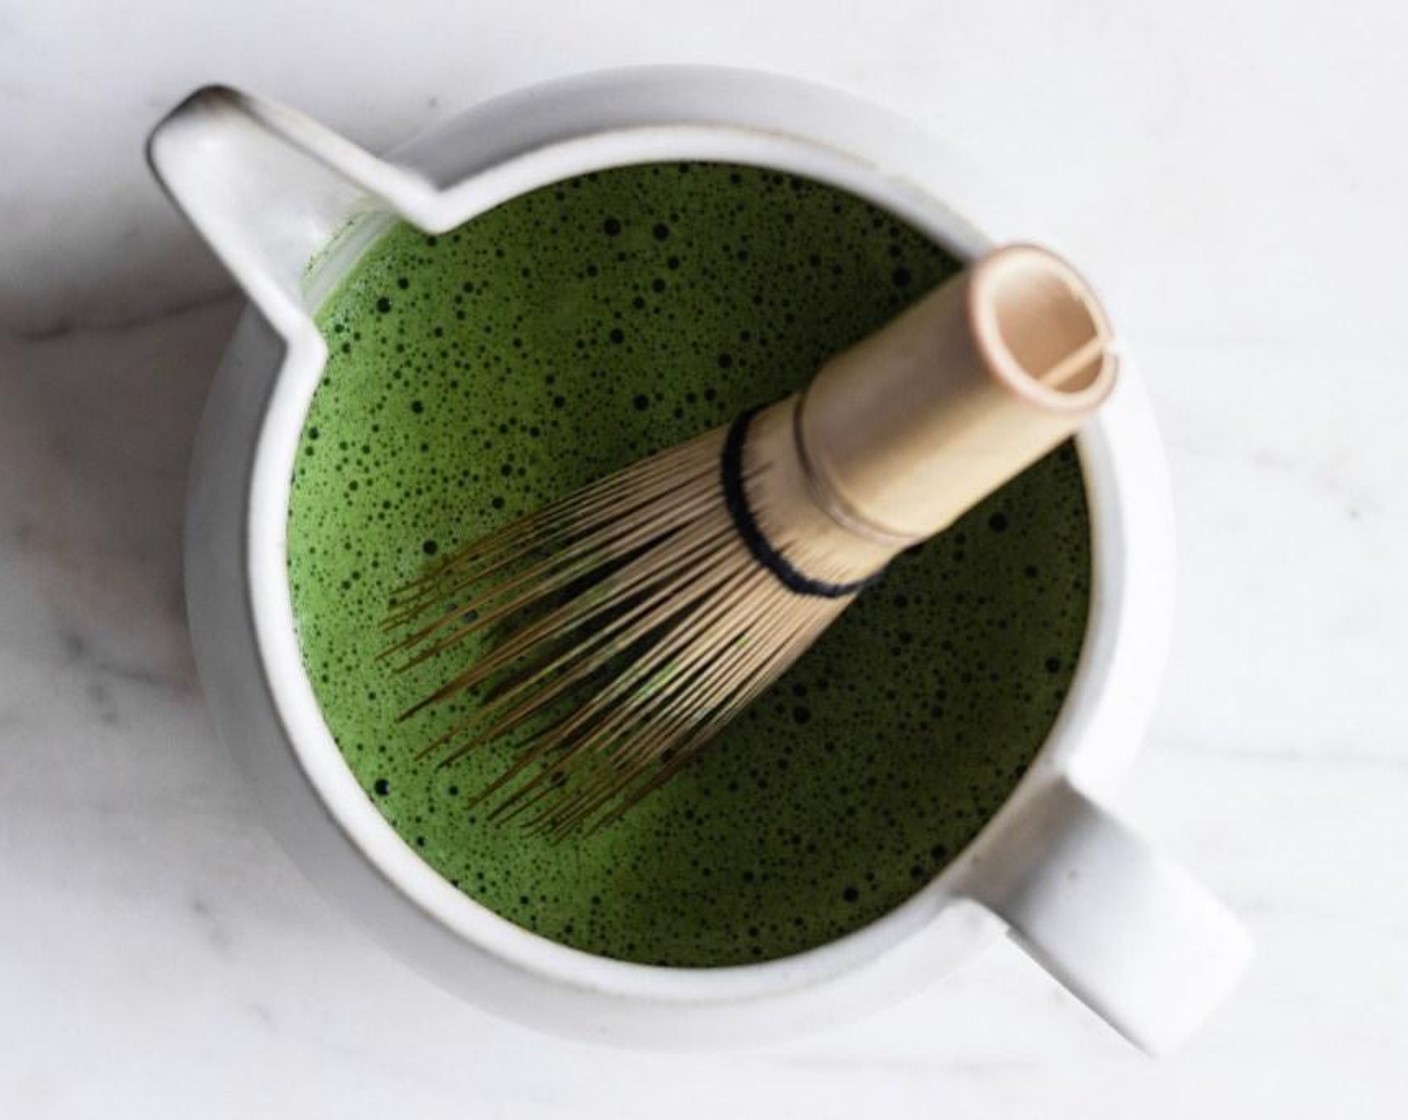 step 3 Pour Water (2 fl oz) over the matcha, and use a bamboo whisk in a zigzag motion to whisk the matcha until smooth and frothy, approximately 10-15 seconds.